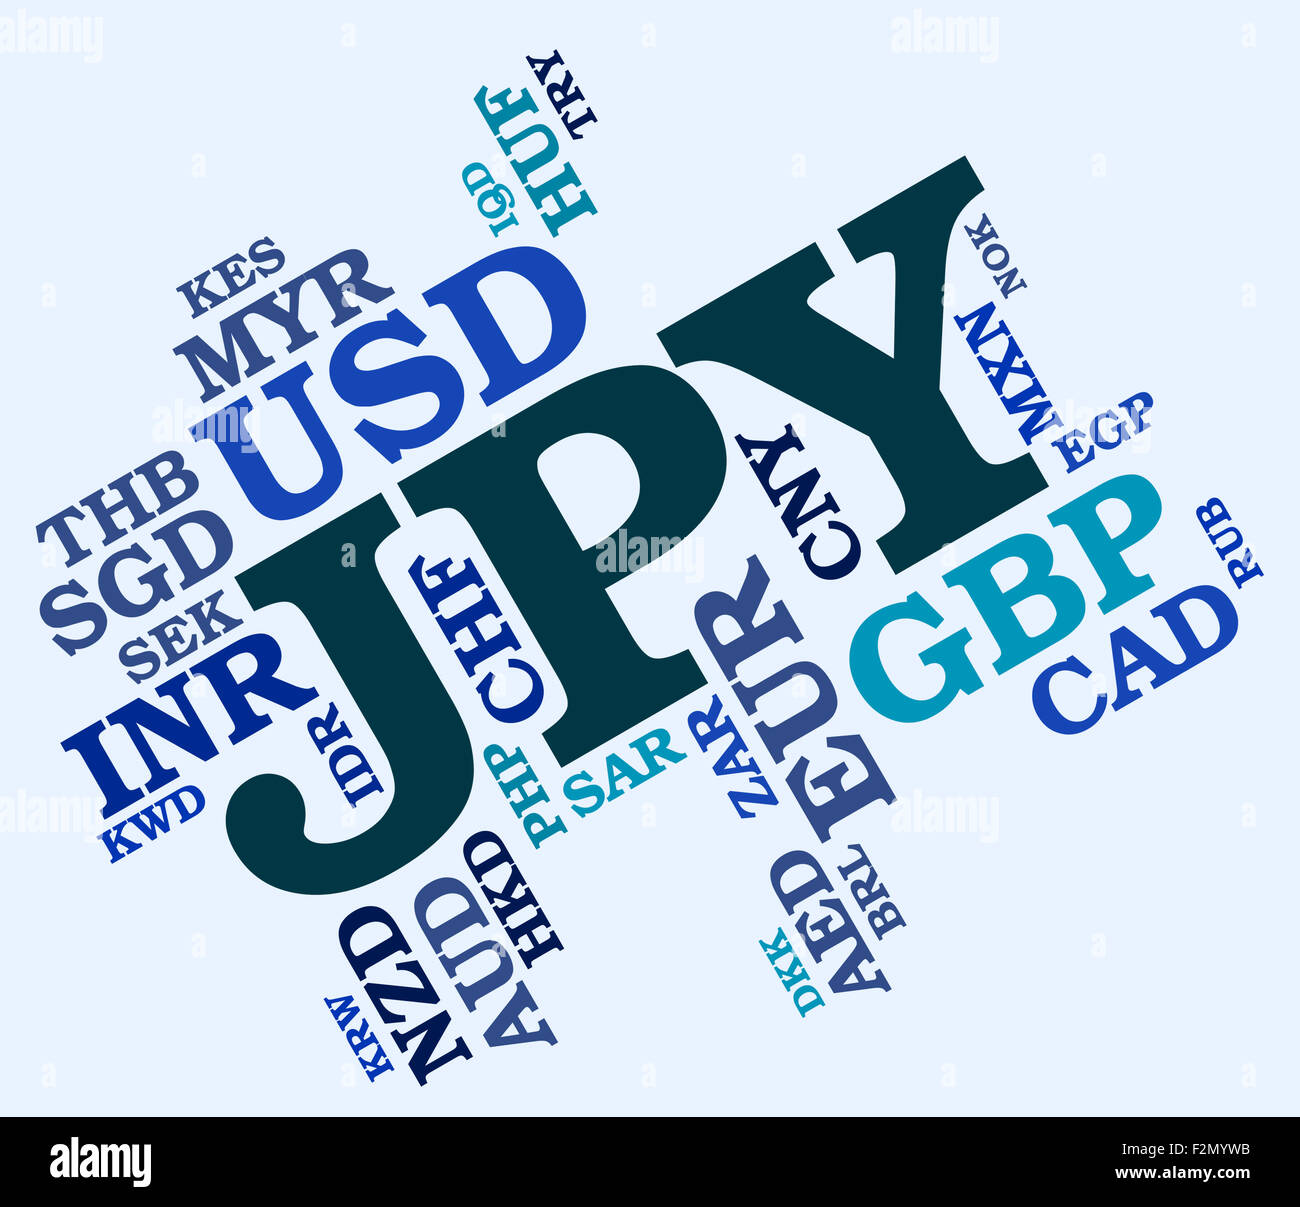 Jpy Currency Indicating Exchange Rate And Banknotes Stock Photo